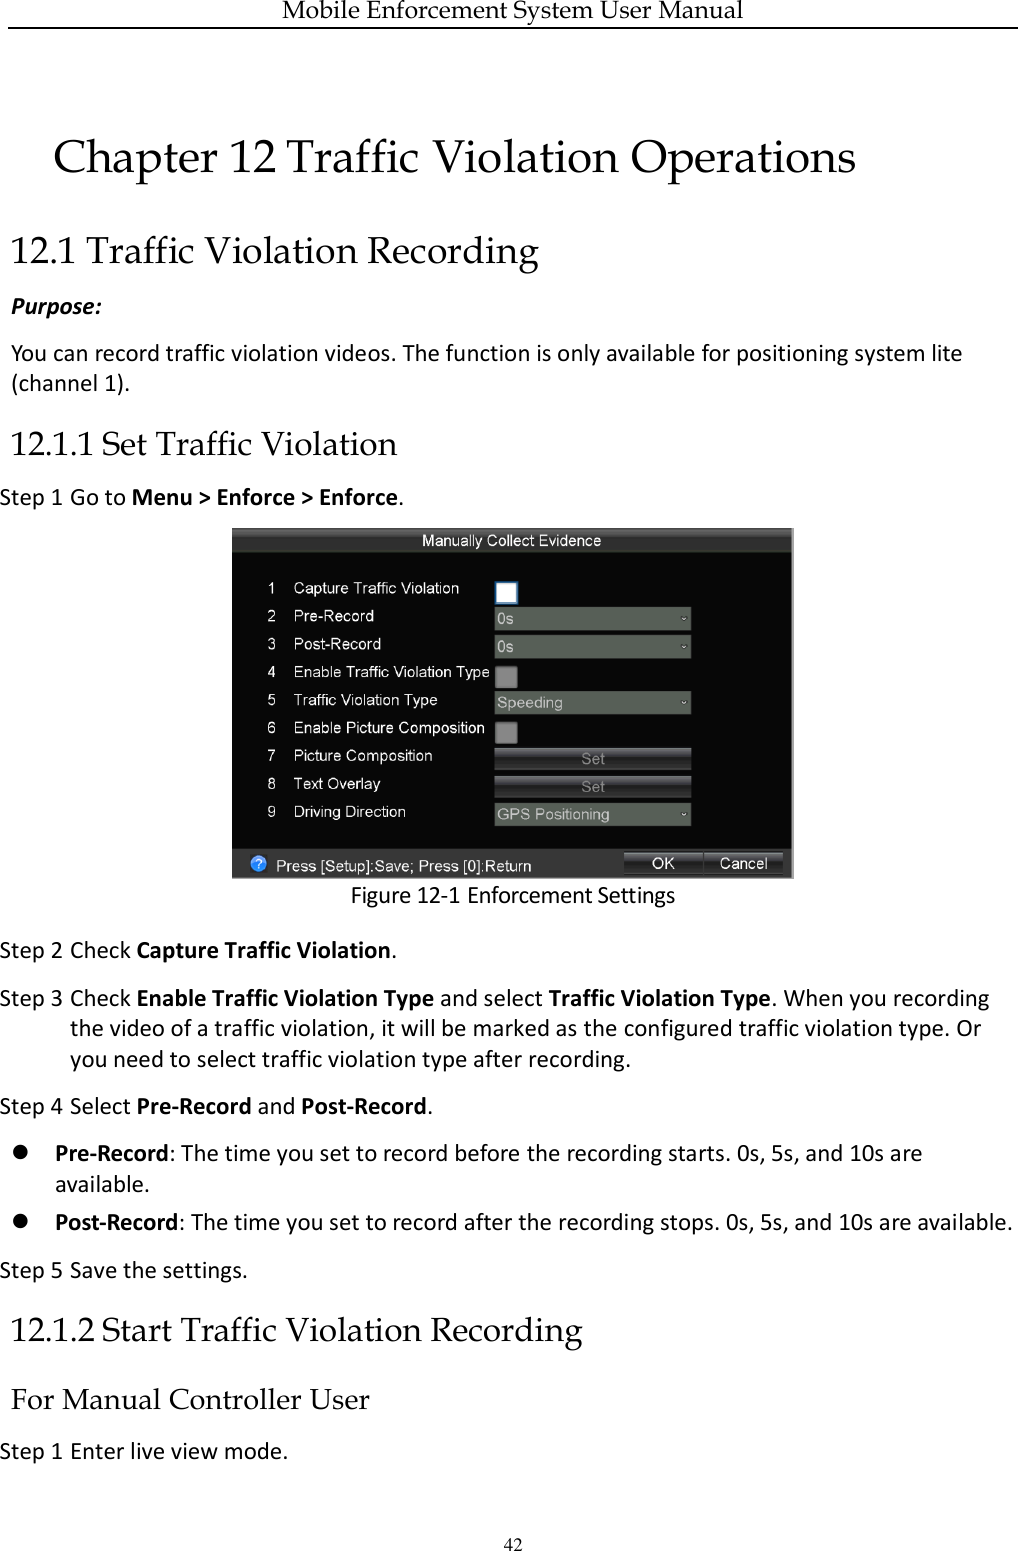 Mobile Enforcement System User Manual 42 Chapter 12 Traffic Violation Operations 12.1 Traffic Violation Recording   Purpose: You can record traffic violation videos. The function is only available for positioning system lite (channel 1). 12.1.1 Set Traffic Violation Step 1 Go to Menu &gt; Enforce &gt; Enforce.  Figure 12-1 Enforcement Settings Step 2 Check Capture Traffic Violation. Step 3 Check Enable Traffic Violation Type and select Traffic Violation Type. When you recording the video of a traffic violation, it will be marked as the configured traffic violation type. Or you need to select traffic violation type after recording. Step 4 Select Pre-Record and Post-Record.  Pre-Record: The time you set to record before the recording starts. 0s, 5s, and 10s are available.  Post-Record: The time you set to record after the recording stops. 0s, 5s, and 10s are available. Step 5 Save the settings. 12.1.2 Start Traffic Violation Recording For Manual Controller User Step 1 Enter live view mode. 